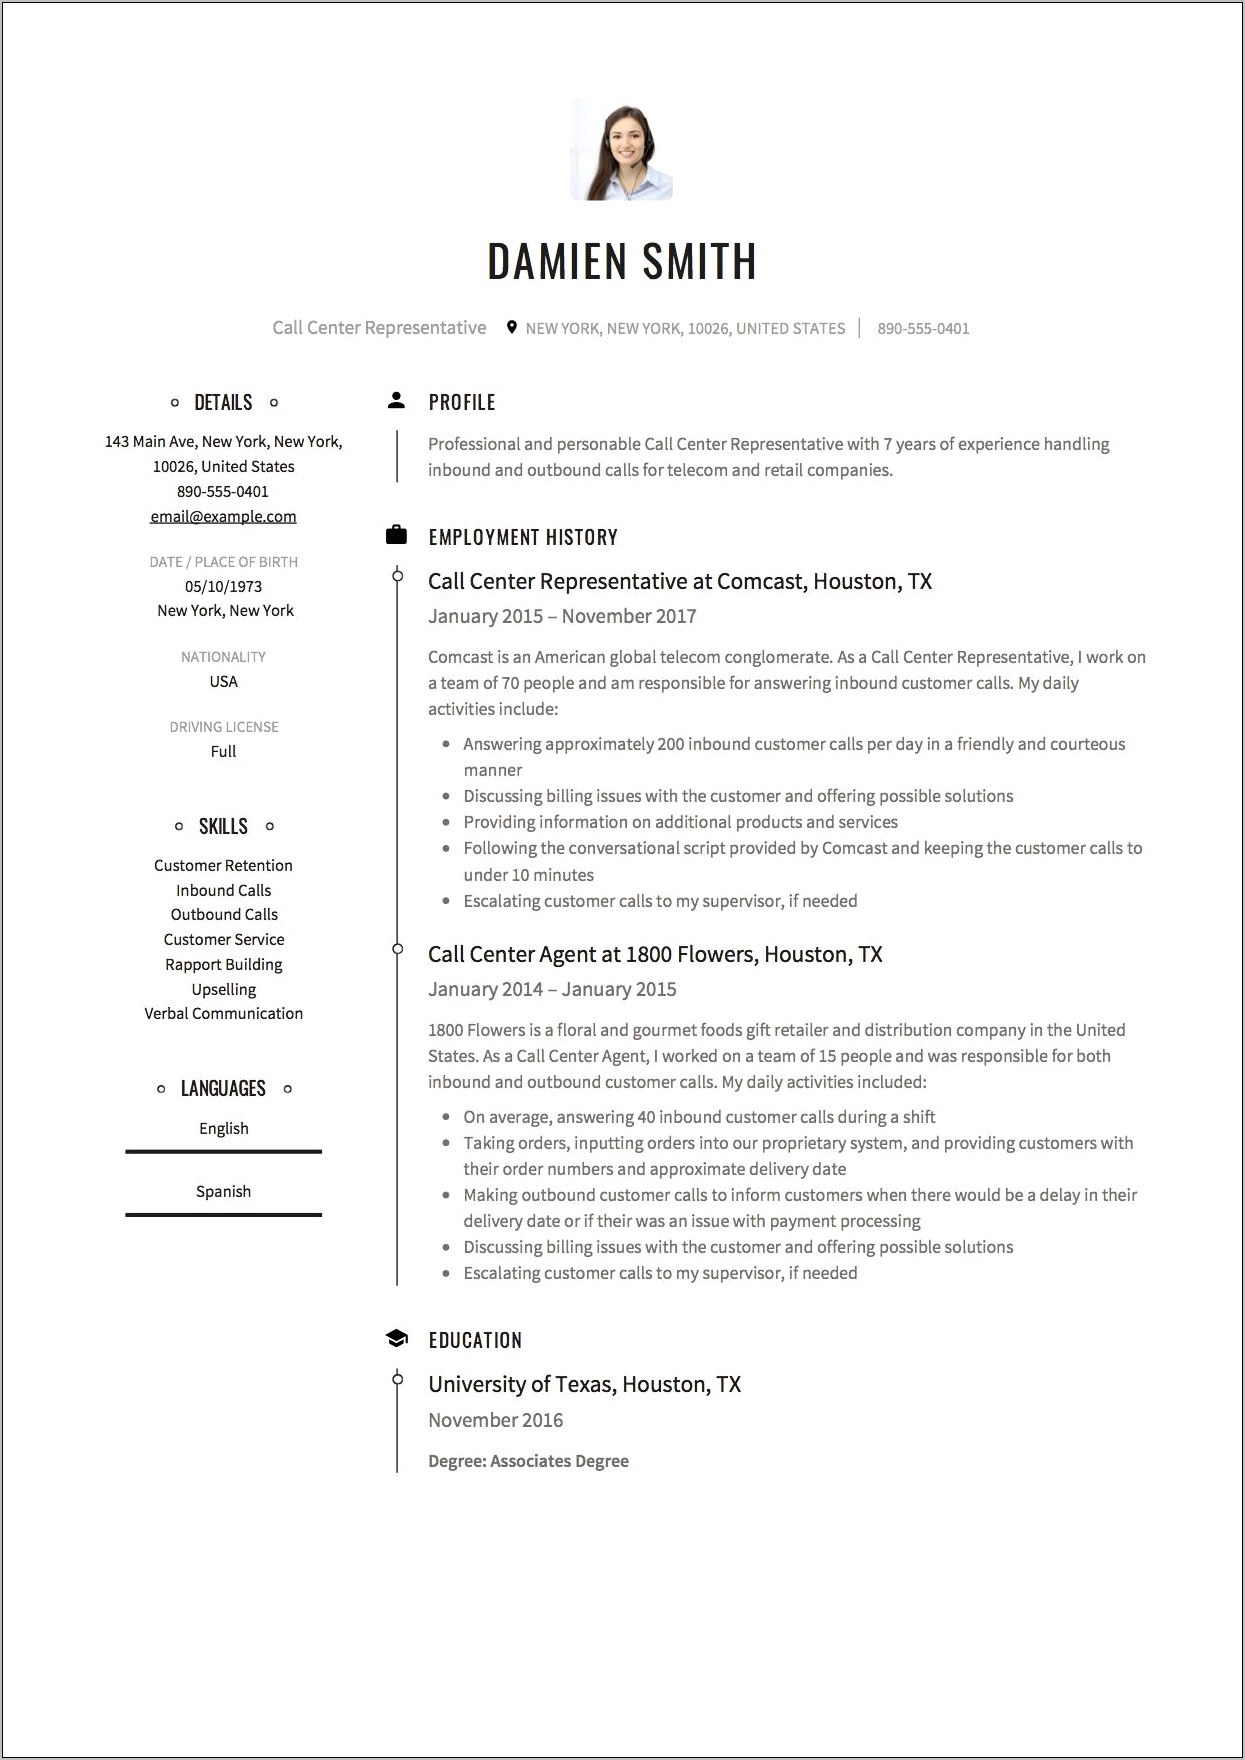 Sample Resume Call Center Agent No Work Experience